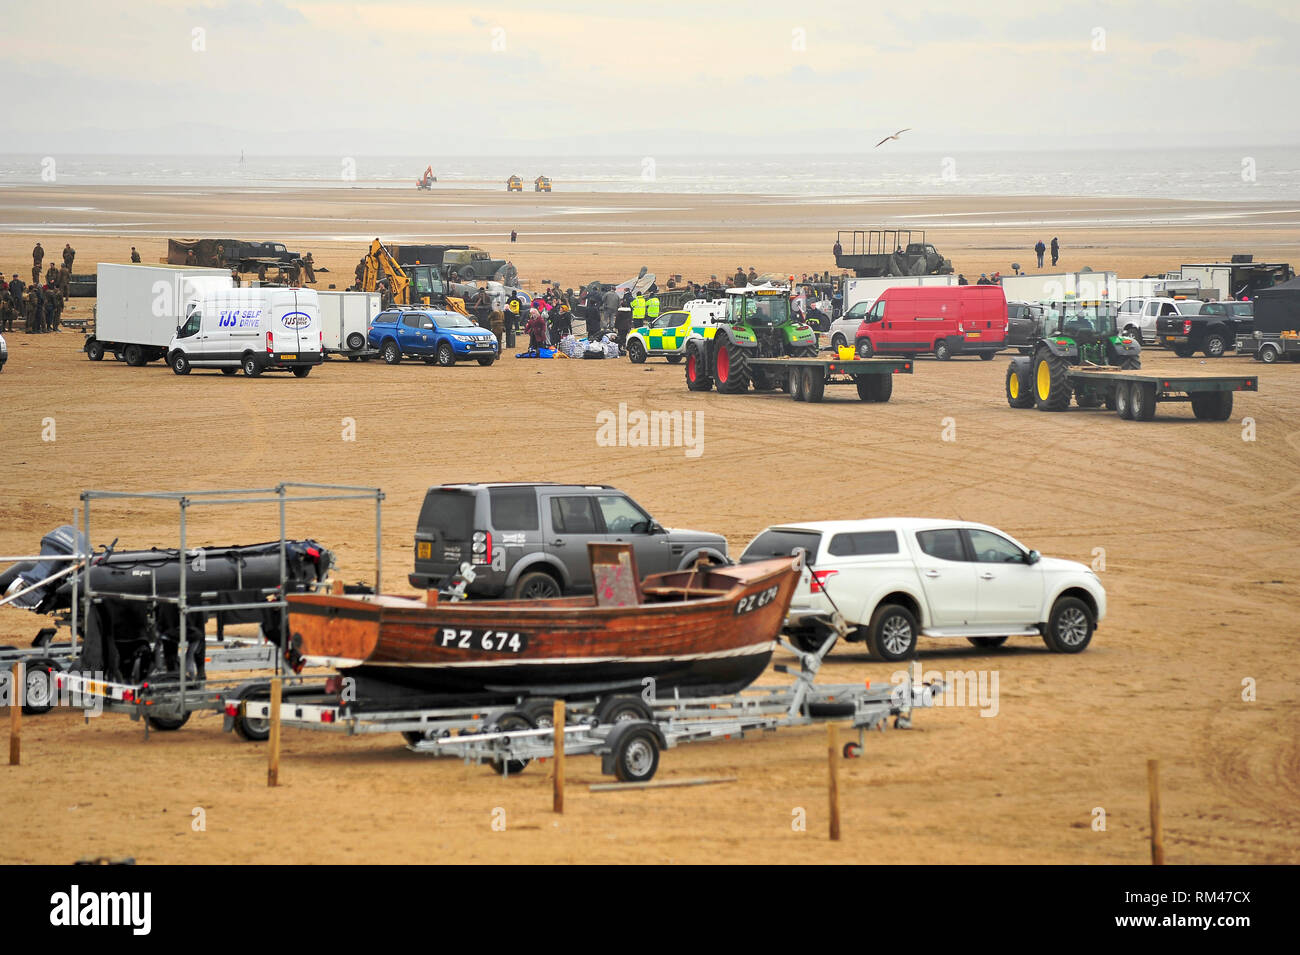 St Annes,Lancashire,UK. 13th Febuary 2019. BBC television War drama World on Fire,is filmed on St Annes beach,Lancashire. Production staff,actors and vehicles were gathered on the wide expanse of beach for the making of the epic story set during the second World War. Kev Walsh/Alamy Live News Stock Photo